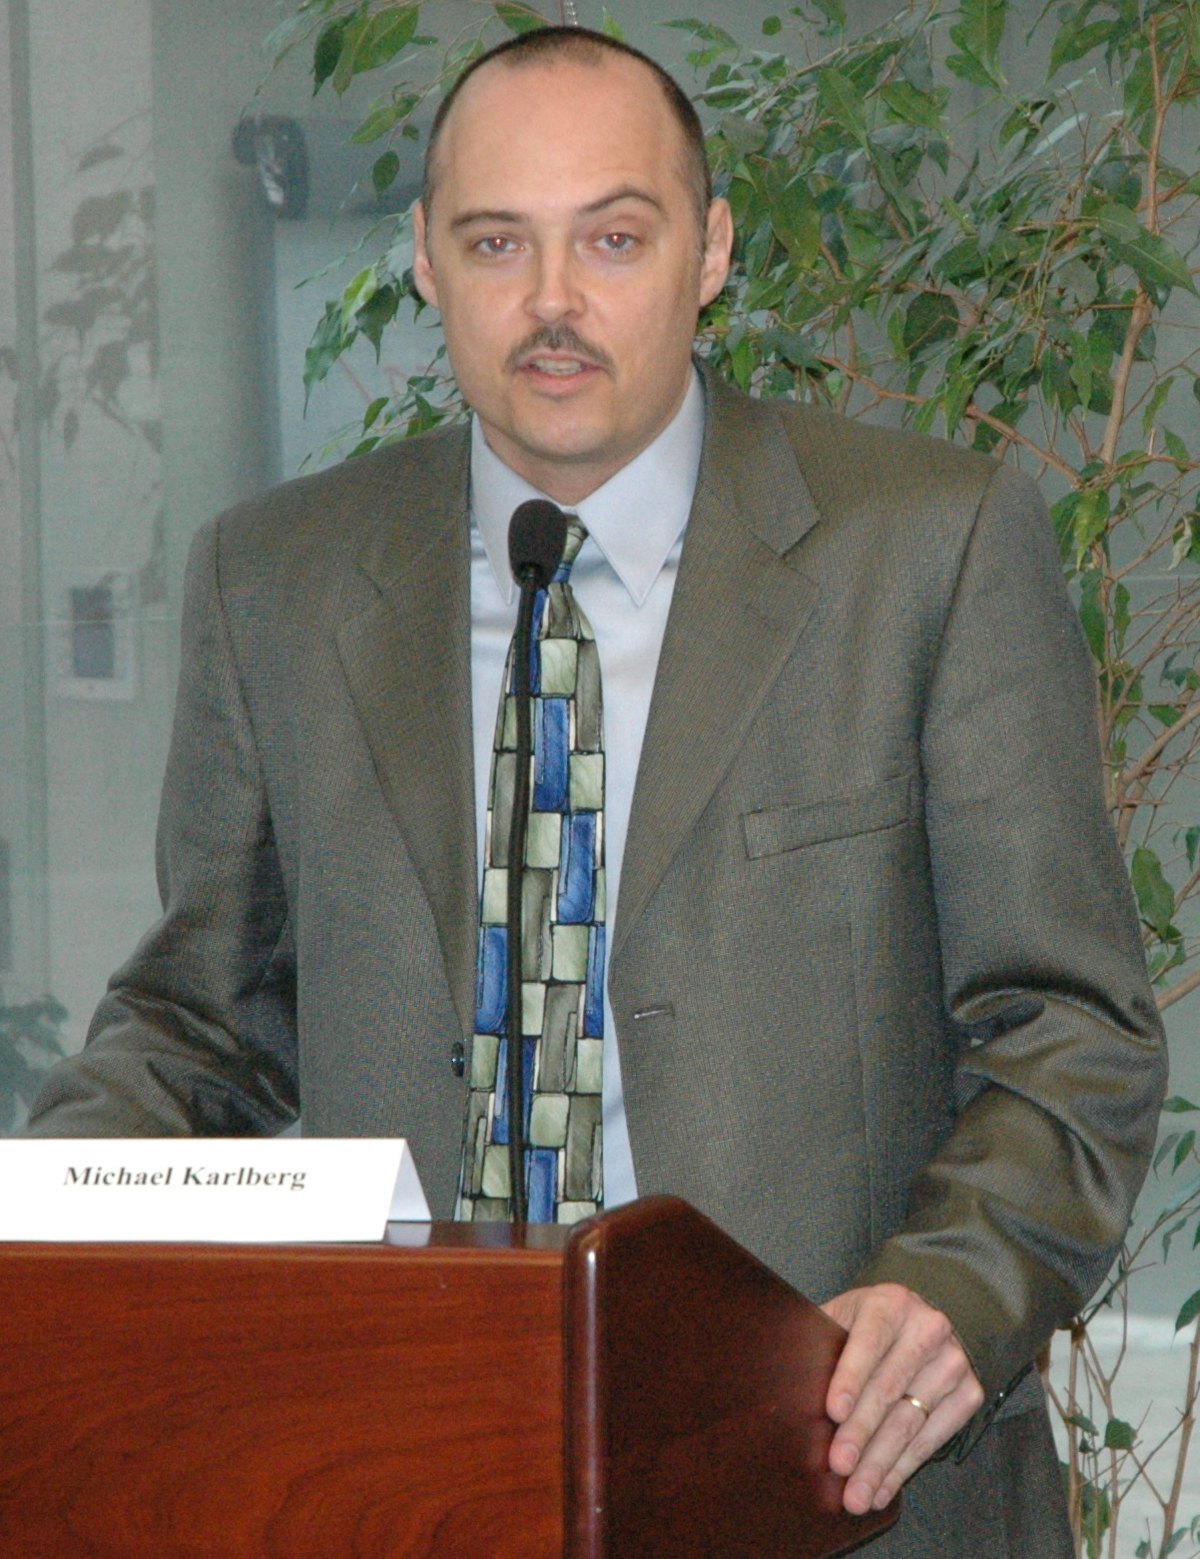 Michael Karlberg of Western Washington University speaks at a discussion titled "Portrayal or Betrayal: How the Media Depicts Women and Girls." The Baha'i International Community hosted the event at its UN offices in New York.